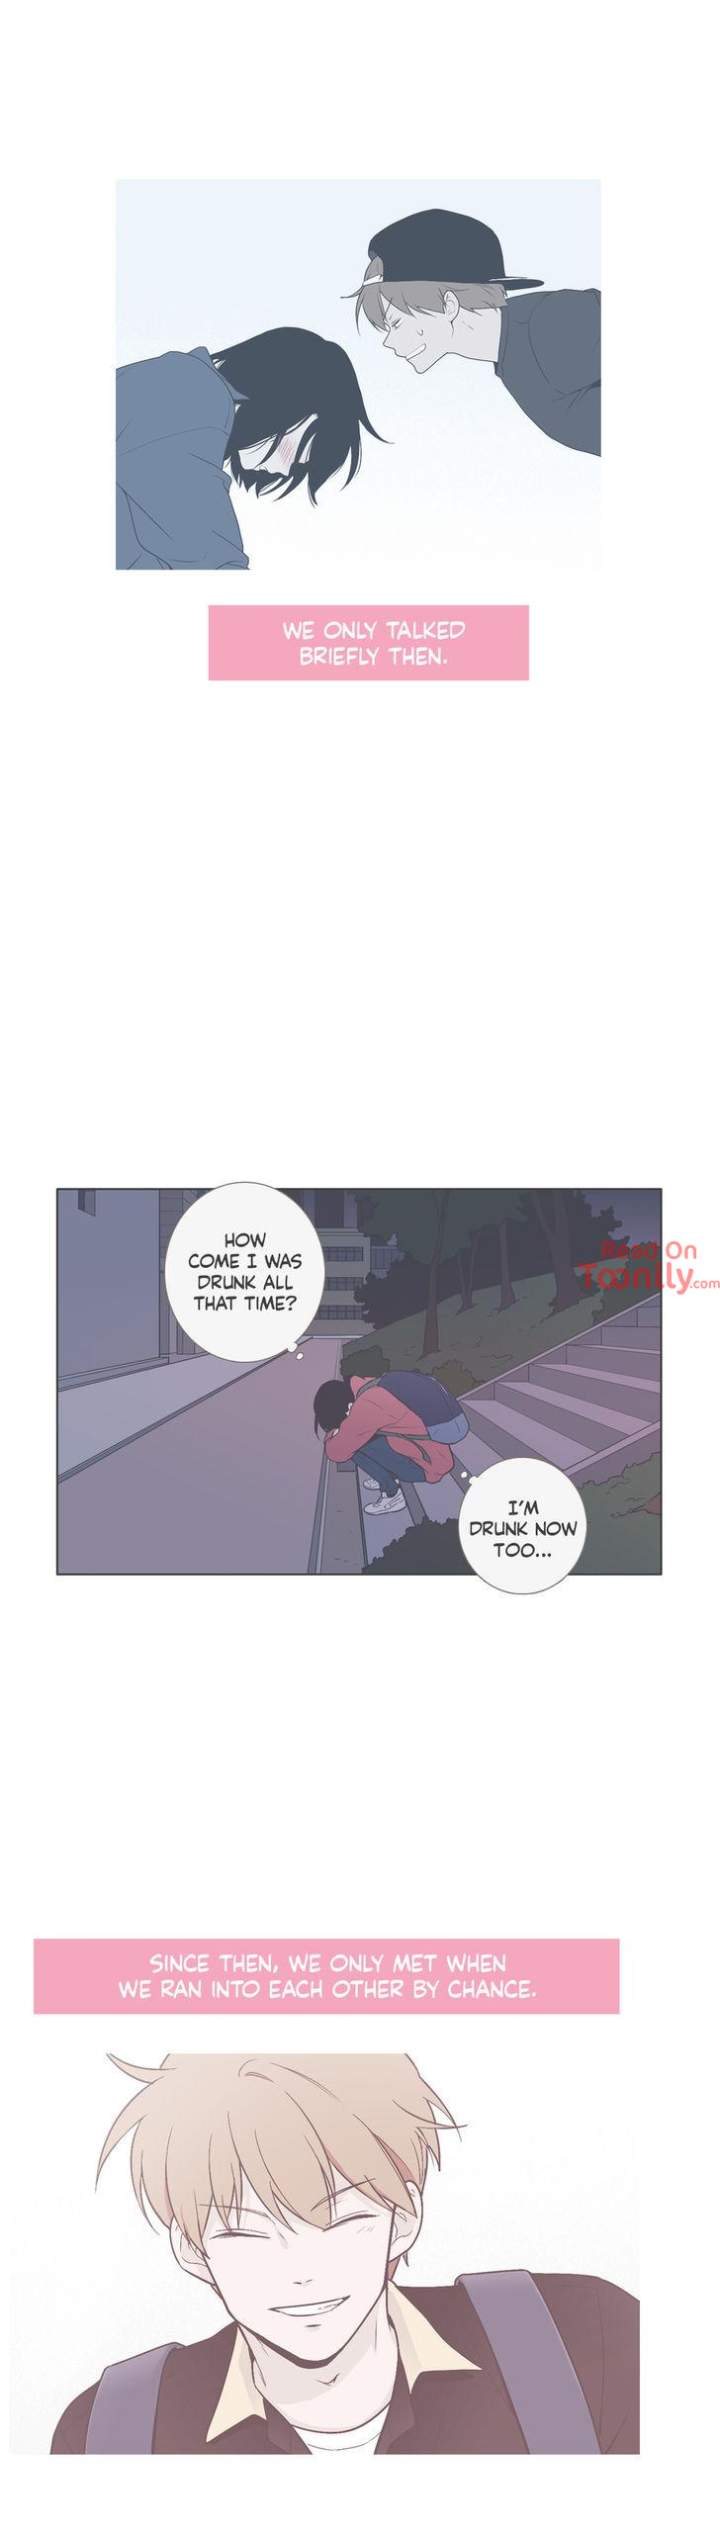 Something About Us - Chapter 63 Page 3